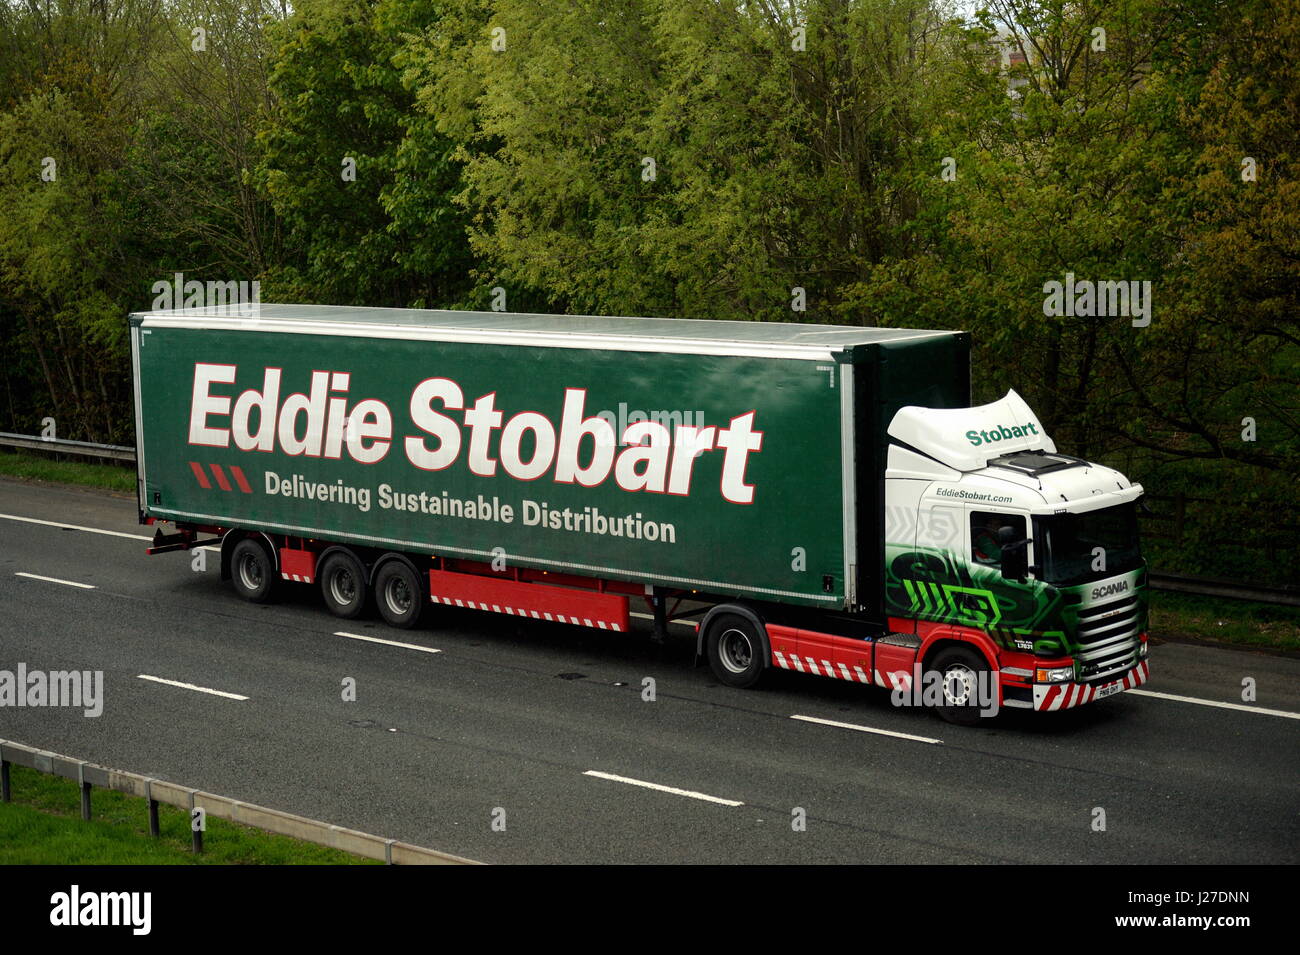 London, UK. 25th Apr, 2017. Eddie Stobart Scania articualted truck. Eddie Stobart Logistics have today floated on the London Stock Exchange's junior market. Money raised from the initial public offering (IPO) will allow the famous trucking and logistics brand to pursue growth. Eddie Stobart started in Cumbria in the 1970's and is now a major pan european logistics player. A Scania tractor unit truck pulling an extra length curtainsided high capacity semi trailer: 25 April 2017   Credit: STUART WALKER/Alamy Live News Stock Photo